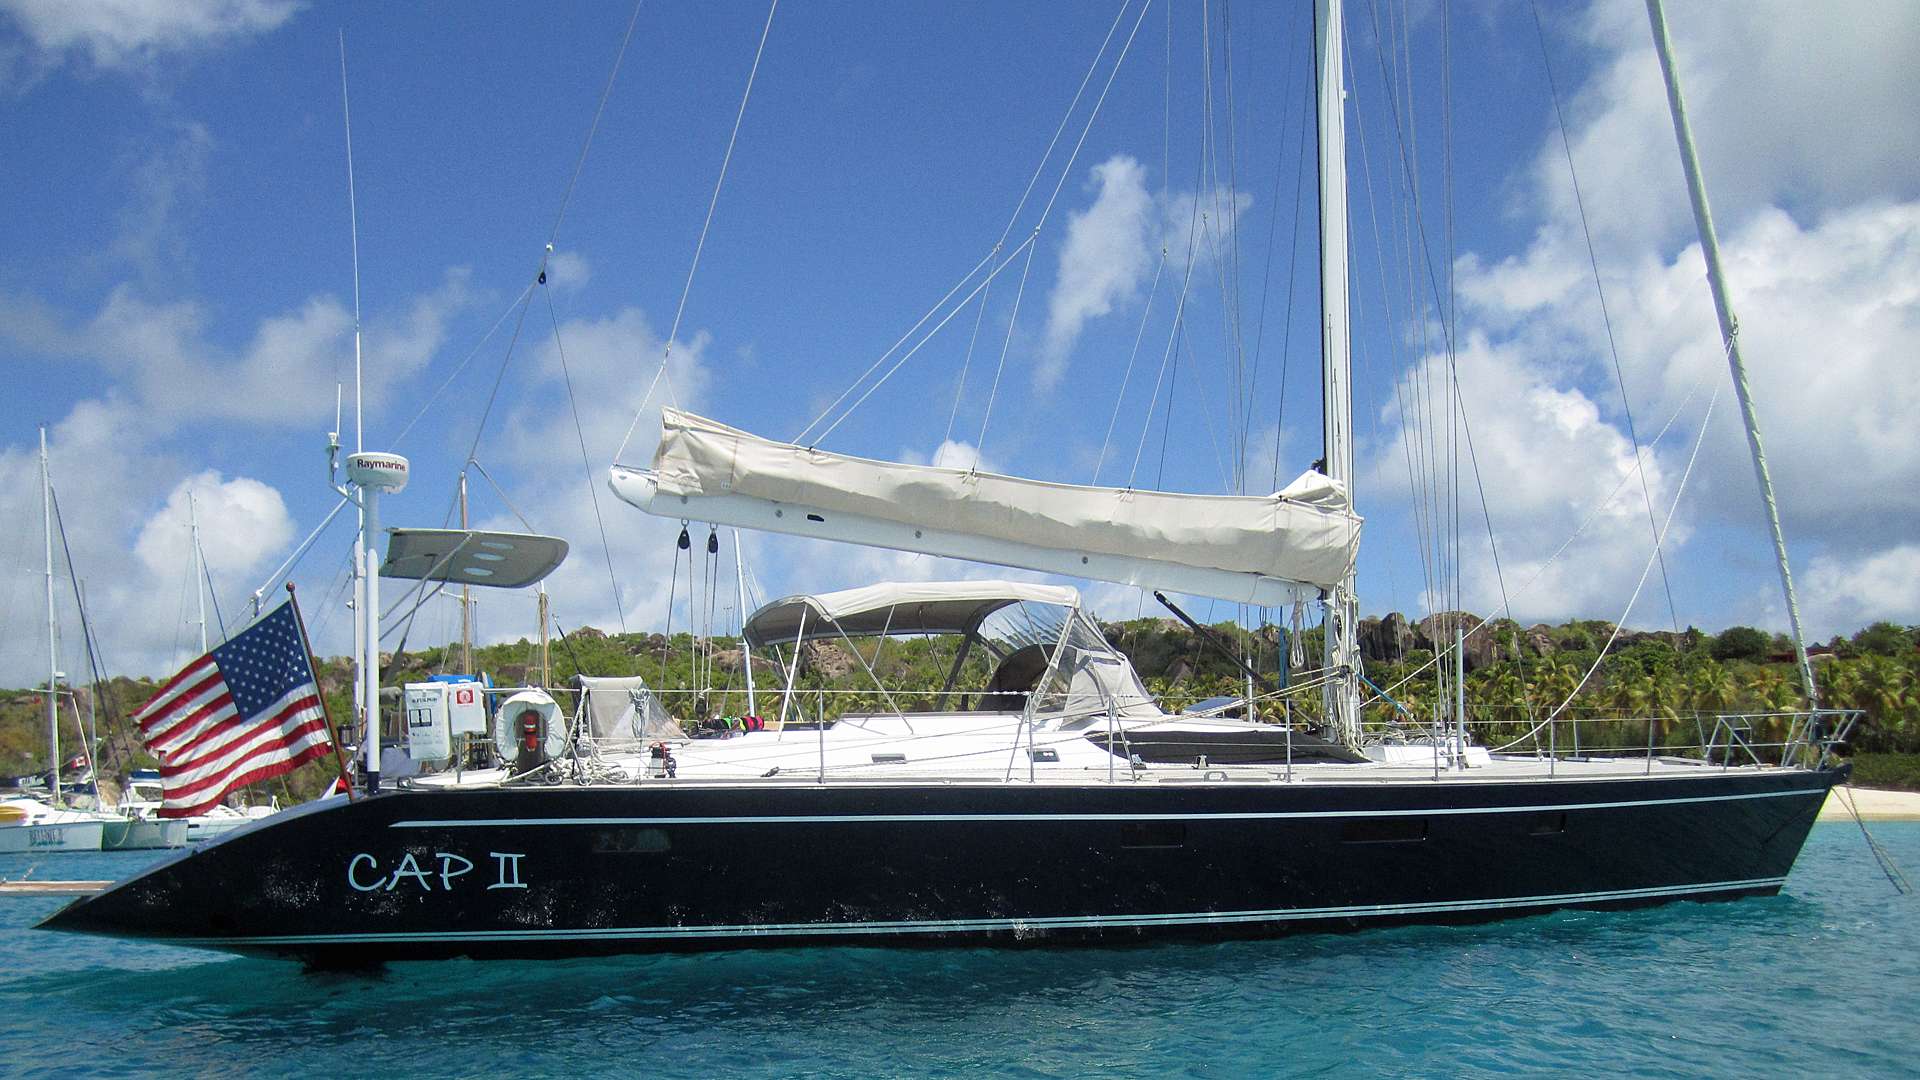 Sailing Yacht 'CAP II' Headturner in every anchorage, 6 PAX, 2 Crew, 76.00 Ft, 23.00 Meters, Built 1992, CNB Bordeaux, Refit Year Main engine rebuild 2014; All of the following new in 2014/2015: standing rigging, B&G wind instruments, radar & char